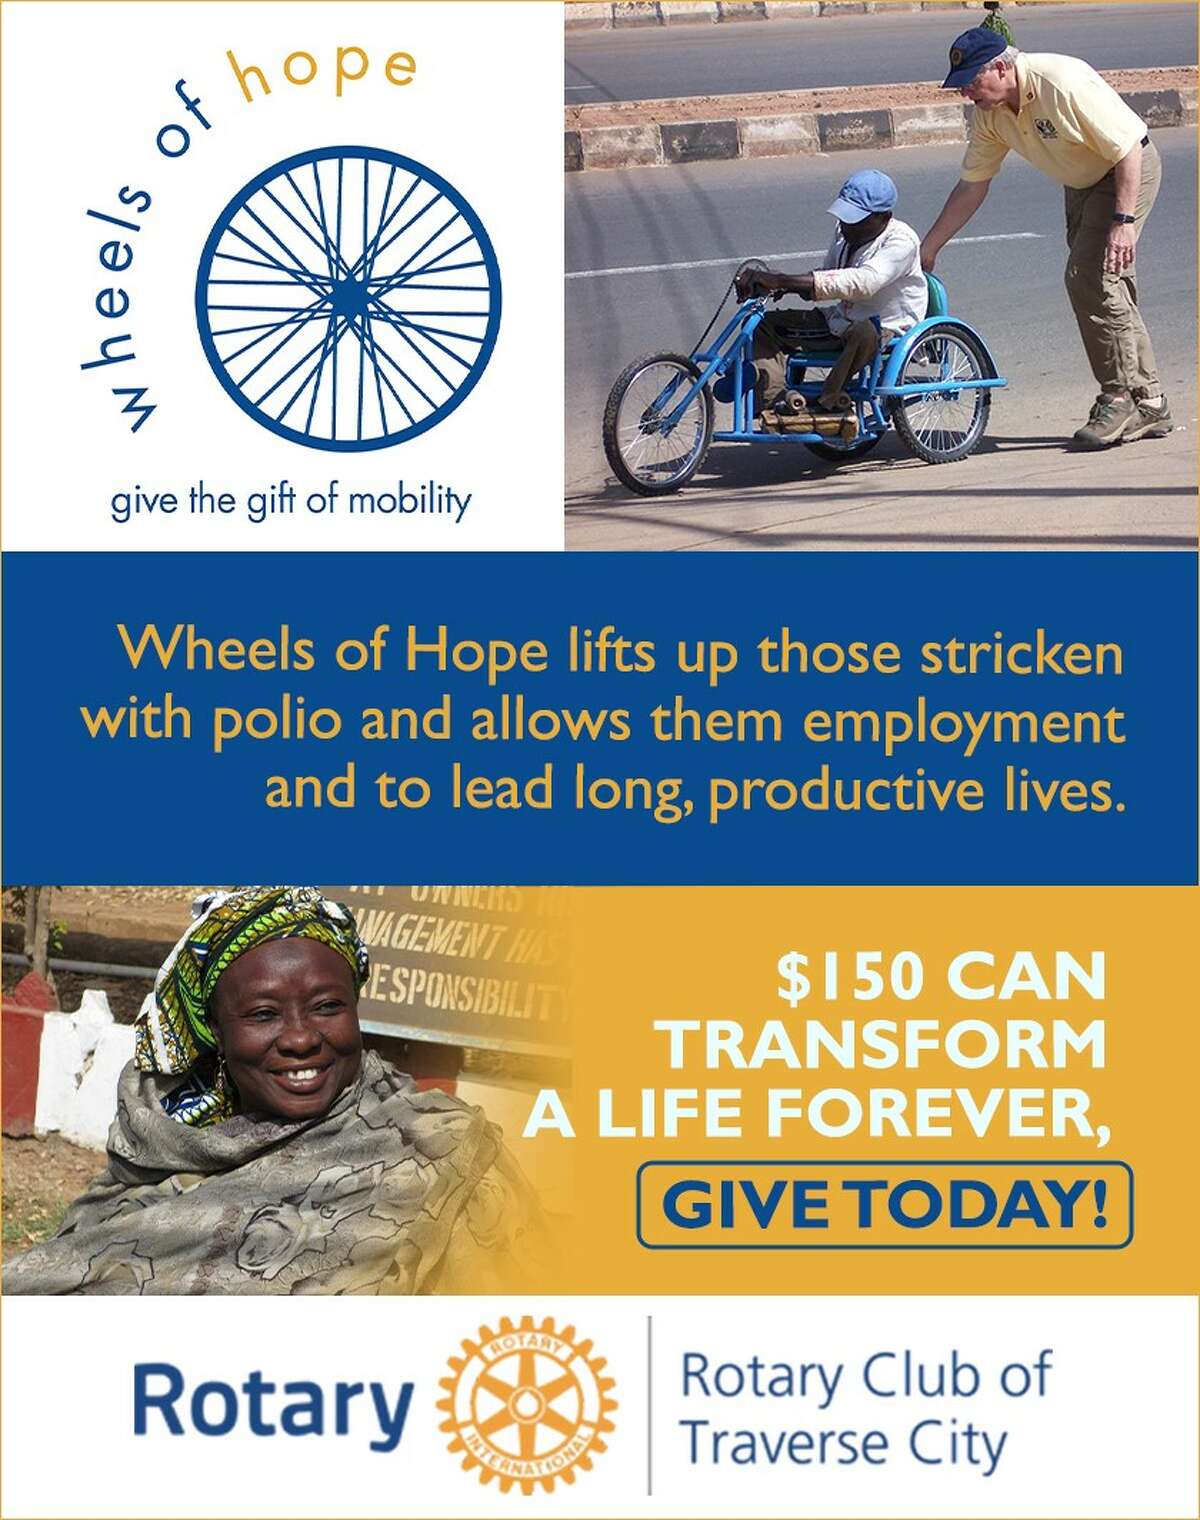 Wheels of Hope provides wheelchairs for polio survivors.